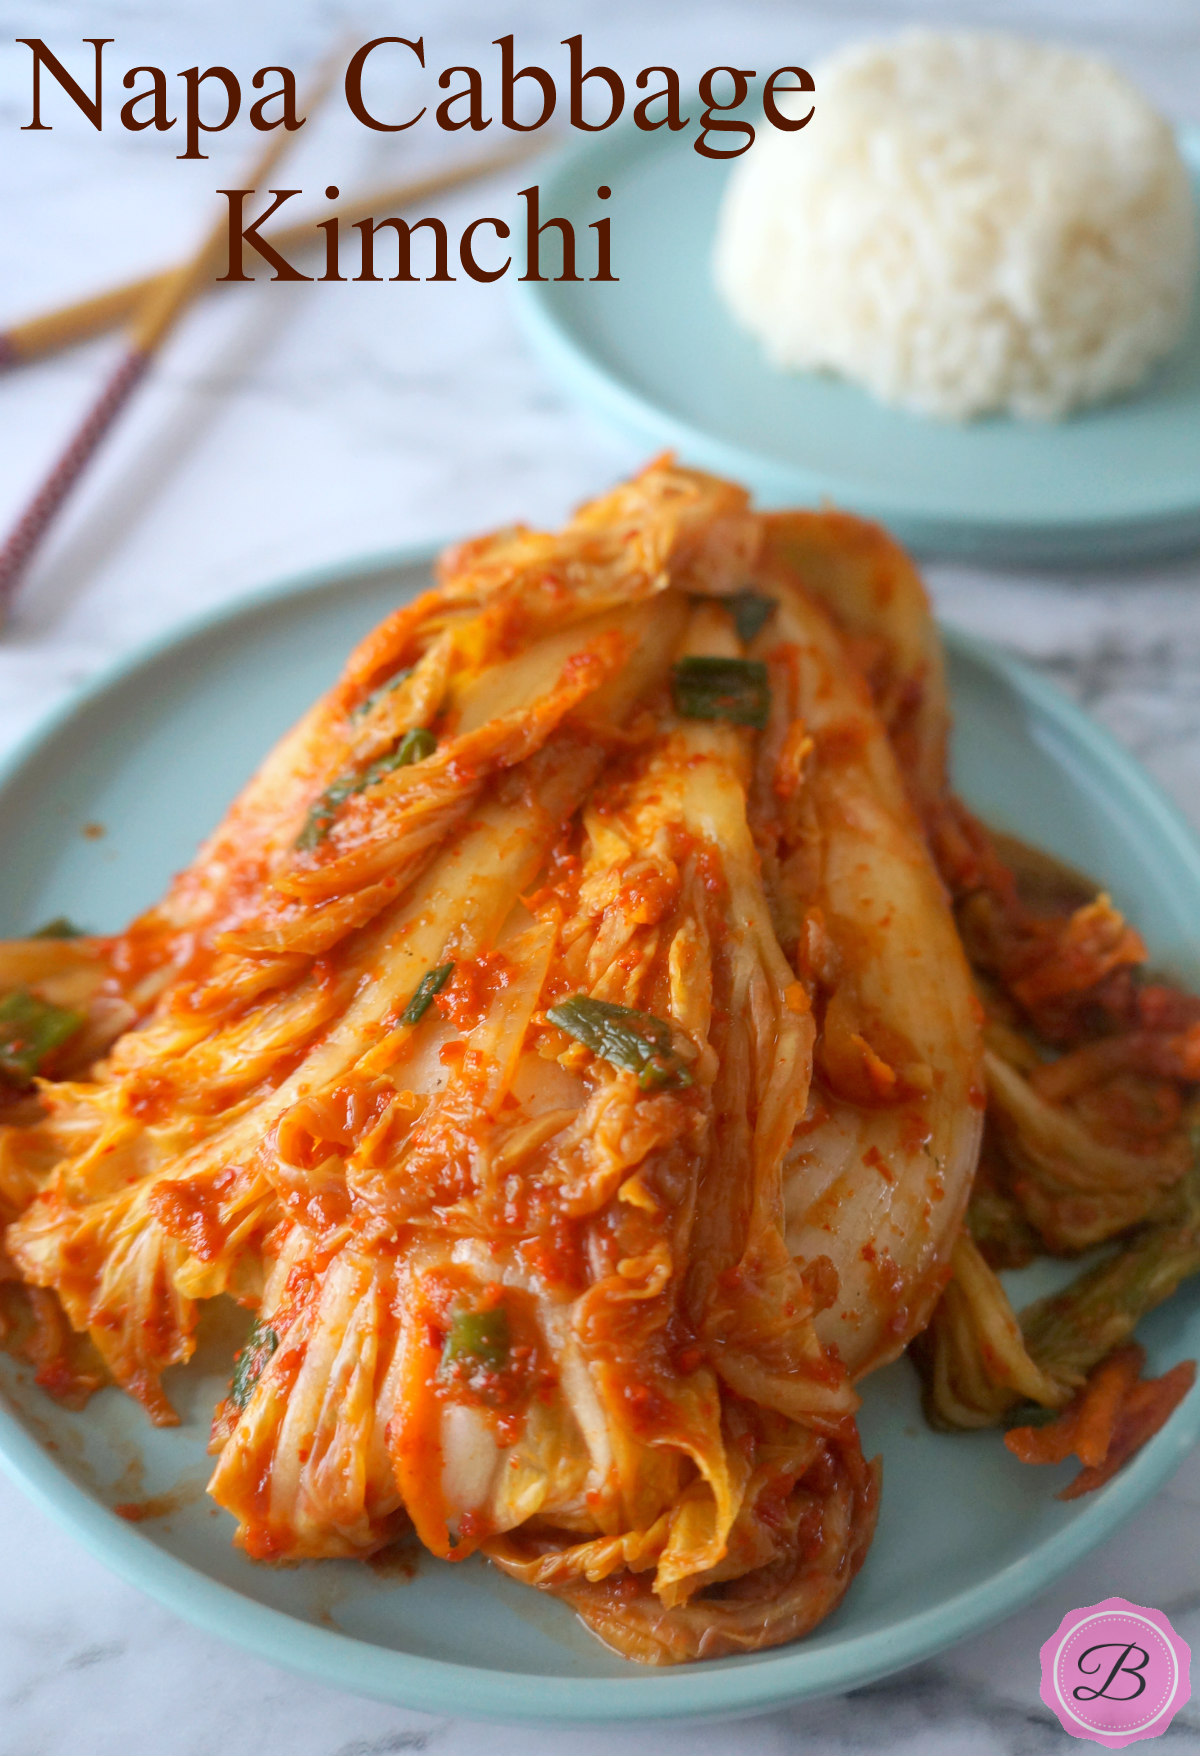 Napa Cabbage Kimchi on a Blue Plate Served with Rice on the Side